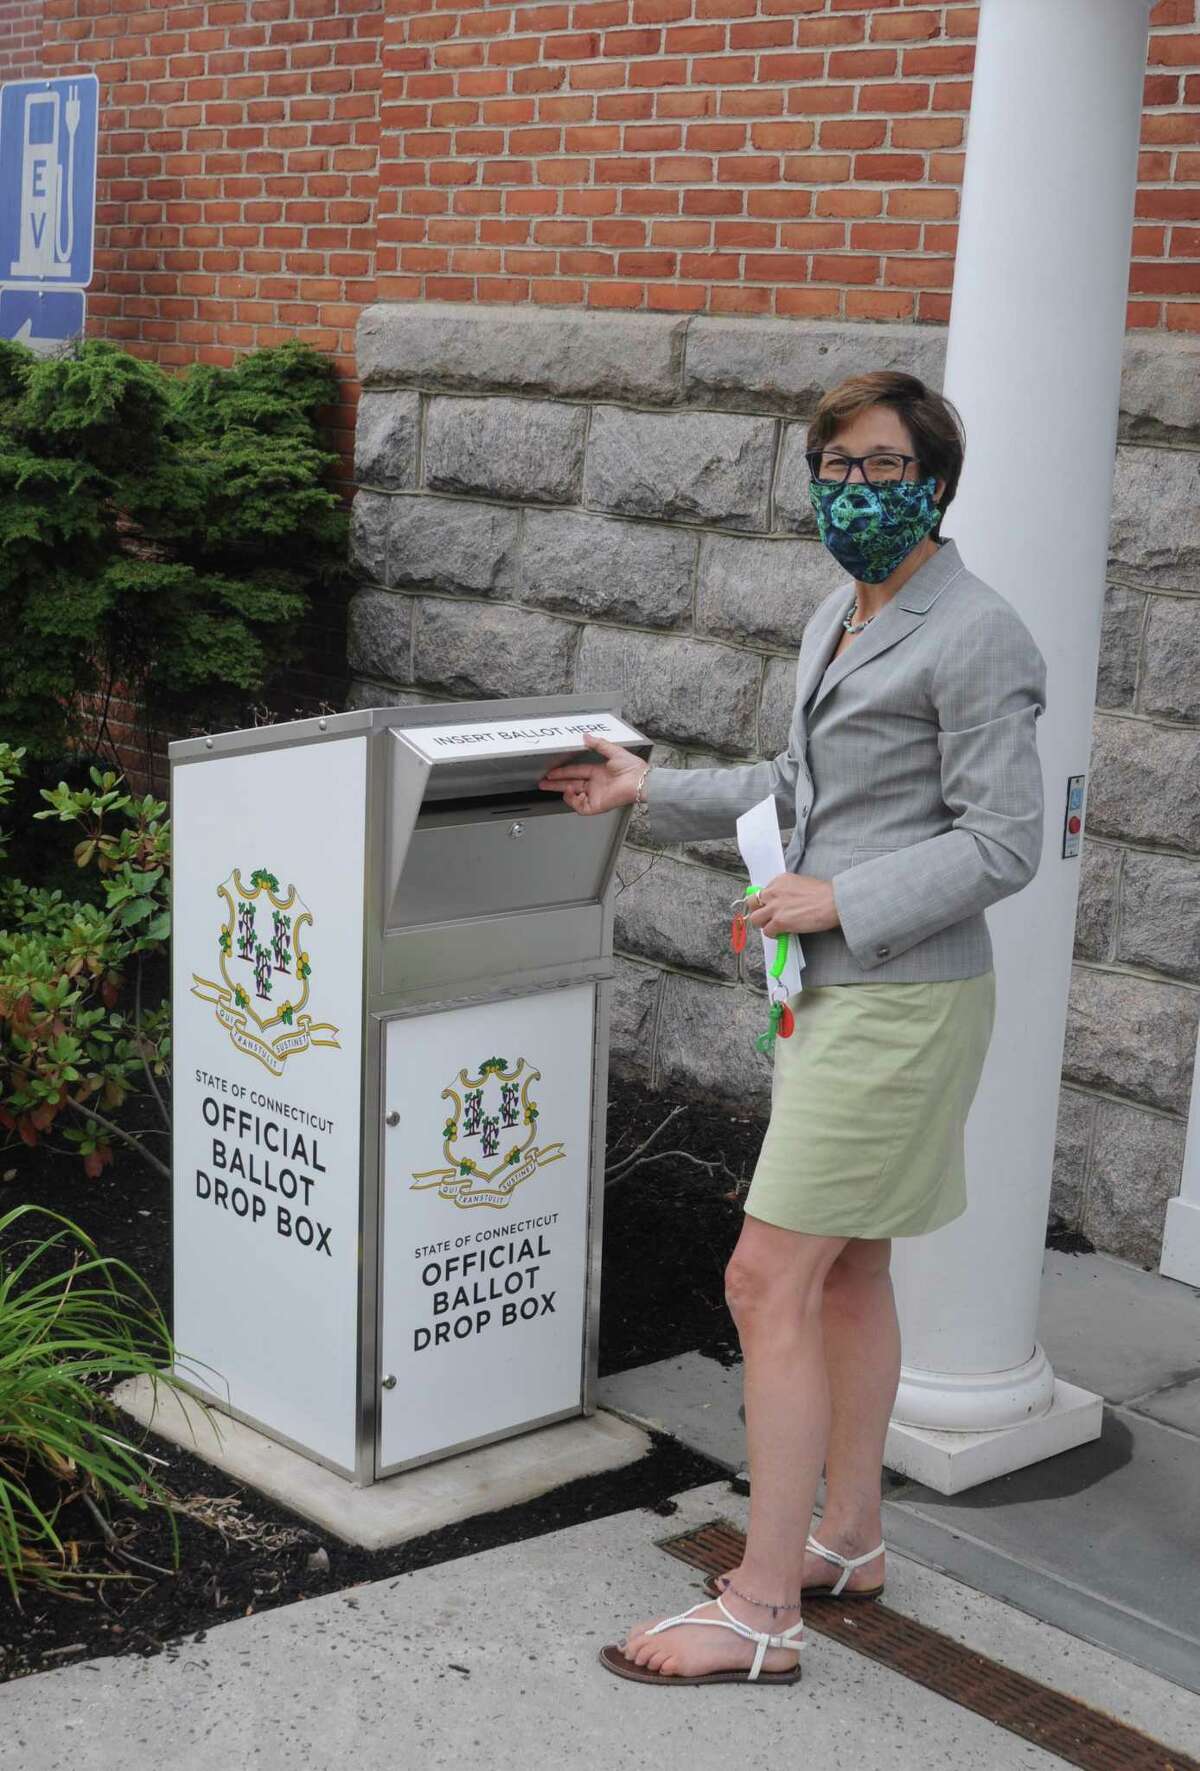 Town Clerk Wendy Lionetti advises voters to use the official ballot drop box by the Bailey Avenue entrance to town hall, rather than mail back absentee ballots and risk having them come in too late.